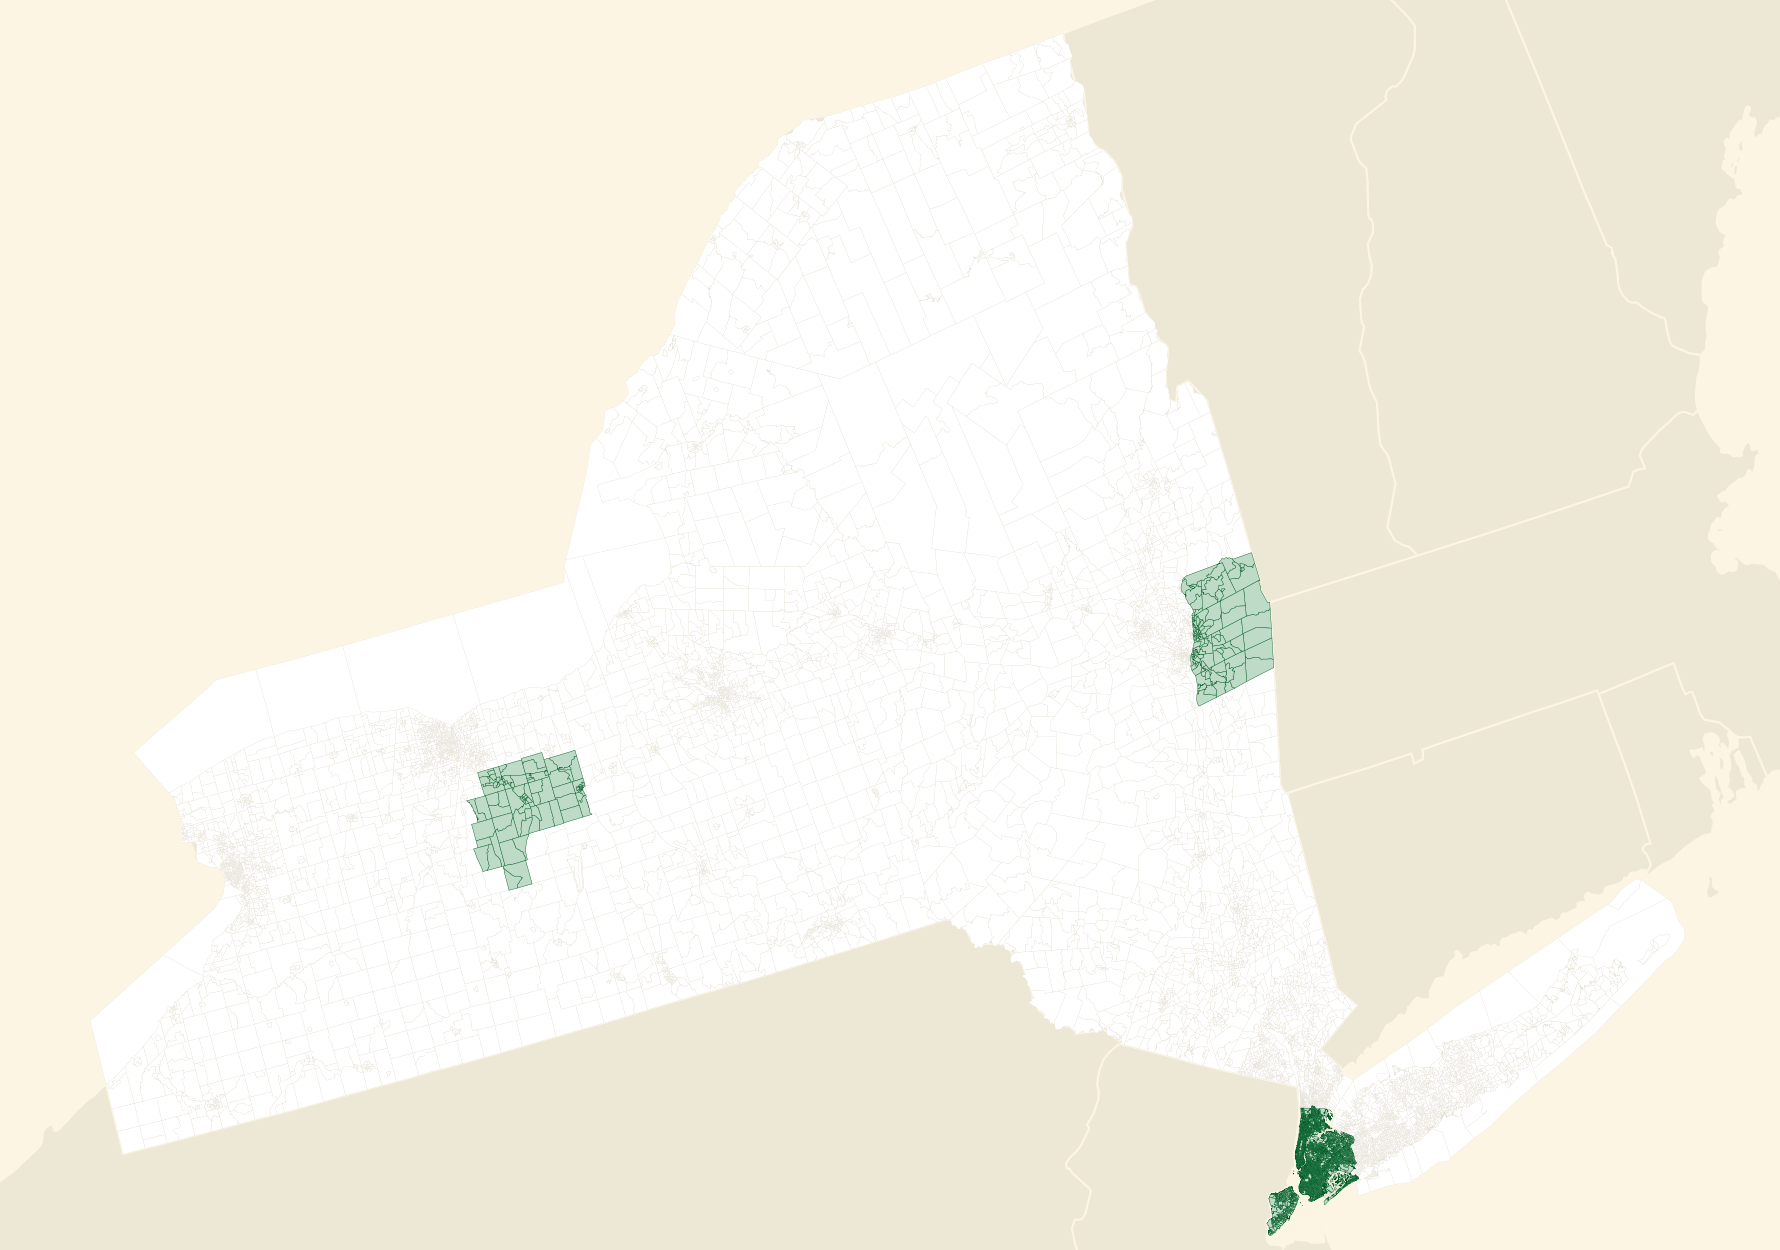 NY state election districts before